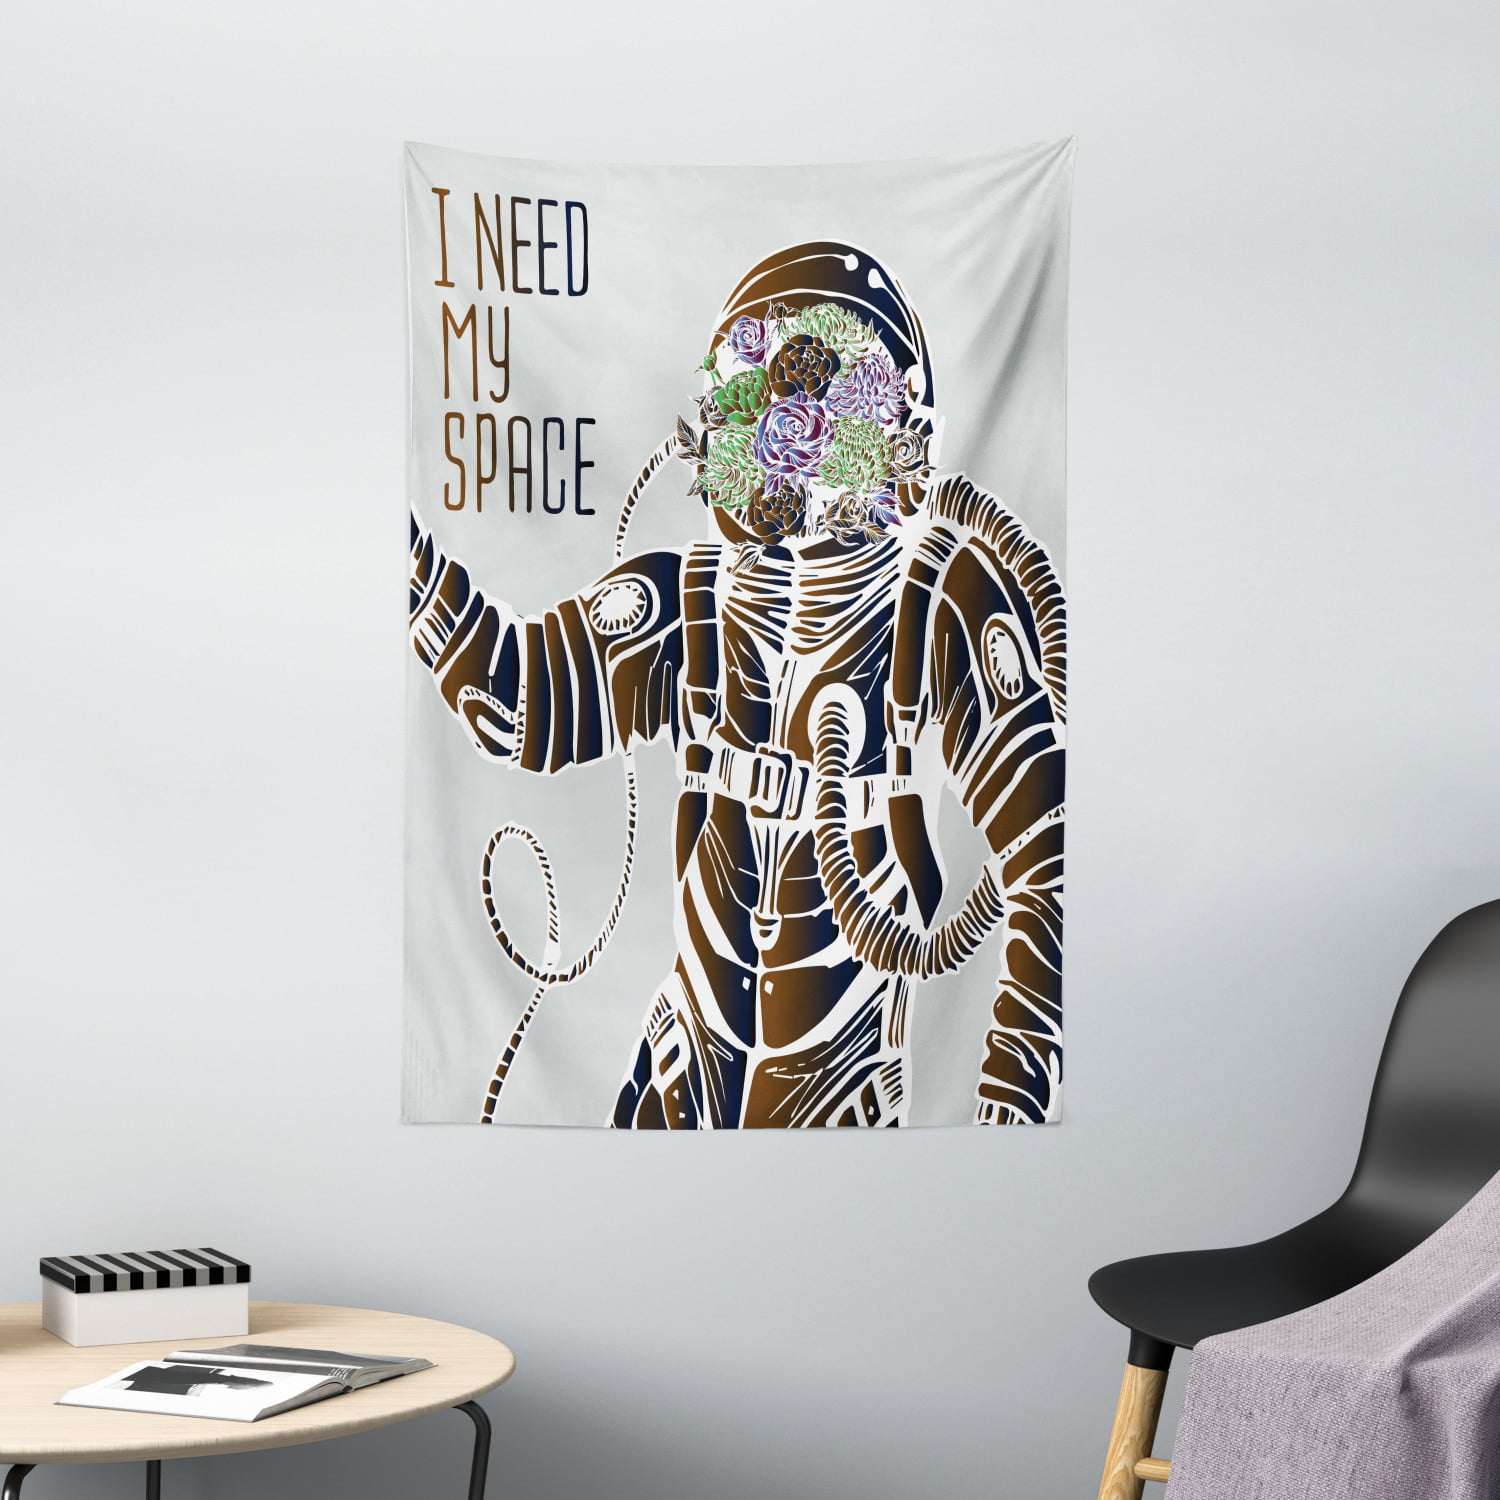 Outer Space Tapestry, Funny Love Quote with a Floral Head Cosmonaut Pilot  Man Humor Illustration, Wall Hanging for Bedroom Living Room Dorm Decor,  40W X 60L Inches, Multicolor, by Ambesonne - Walmart.com